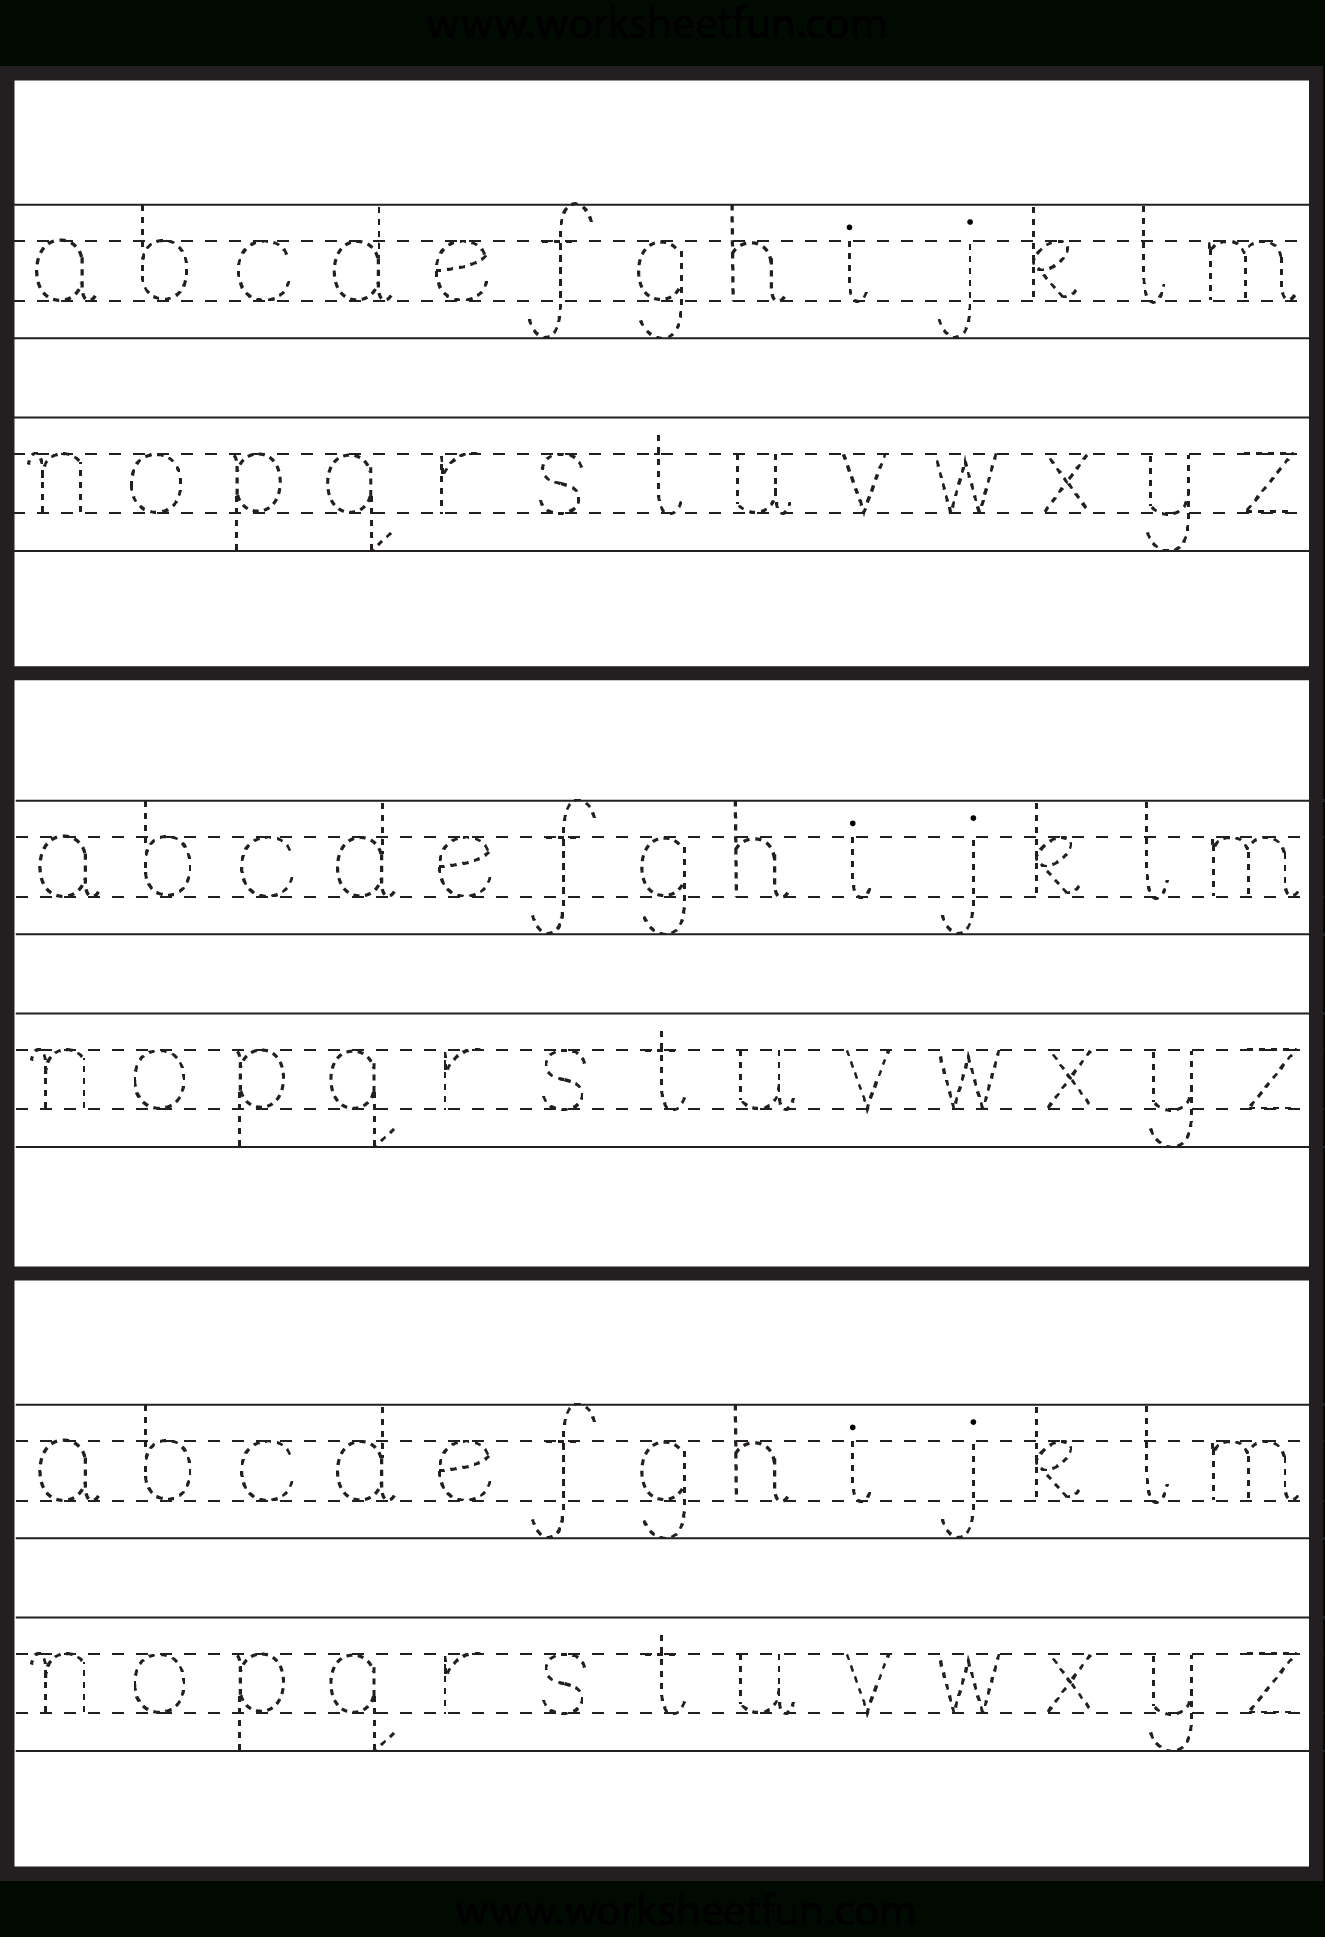 Tracing Small Letters Worksheets Pdf Tracinglettersworksheetscom Pin On For Work 